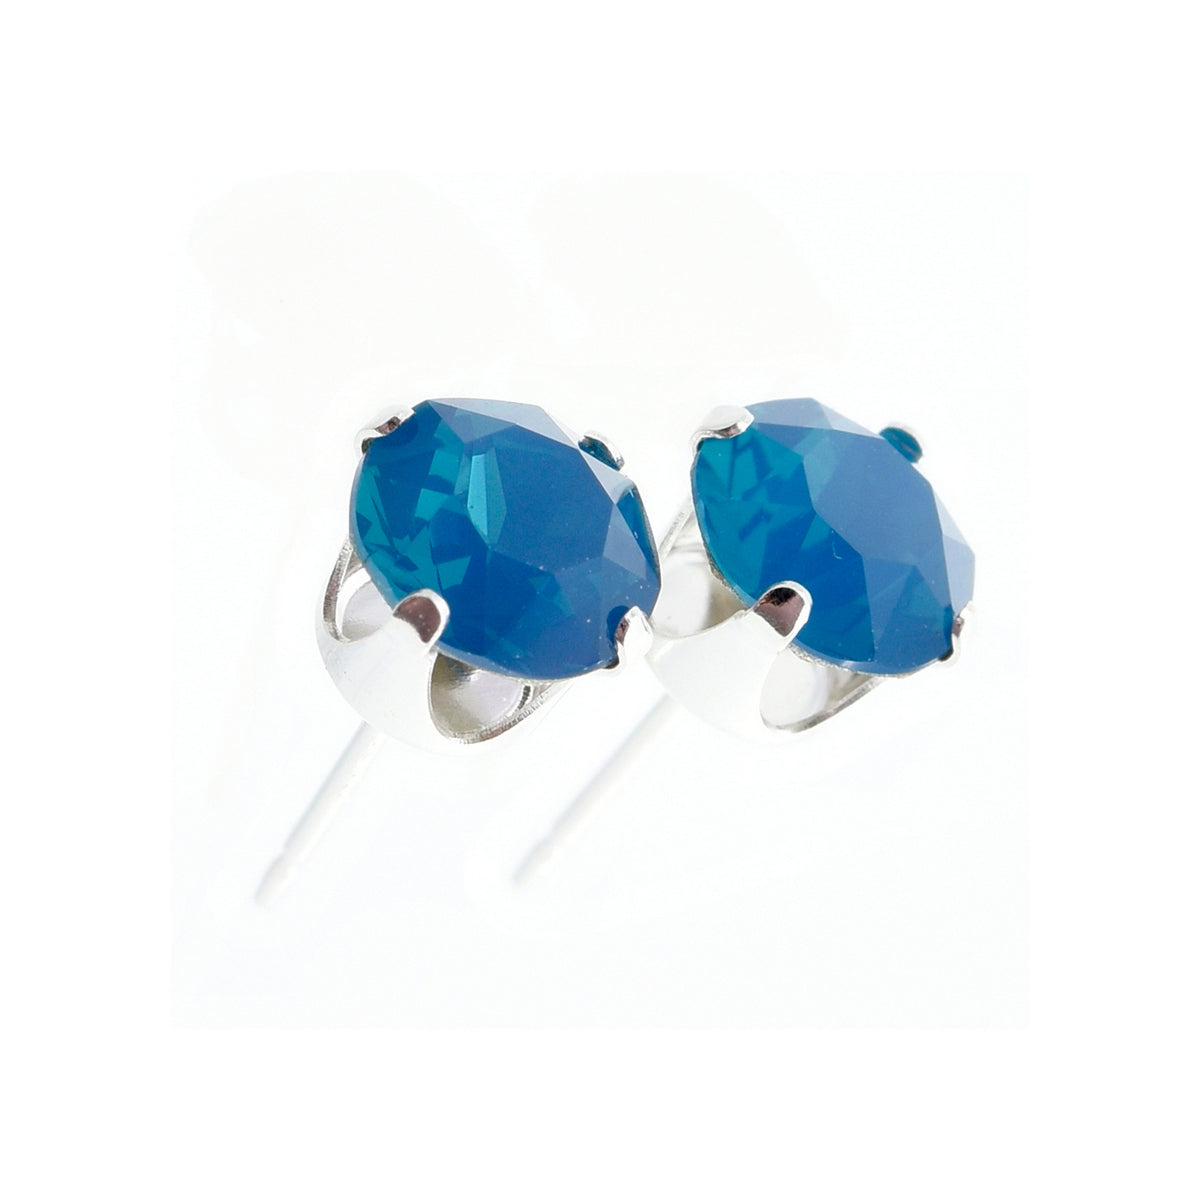 pewterhooter® Women's Classic Collection 925 Sterling silver earrings with sparkling Caribbean Blue Opal crystals, packaged in a gift box for any occasion.